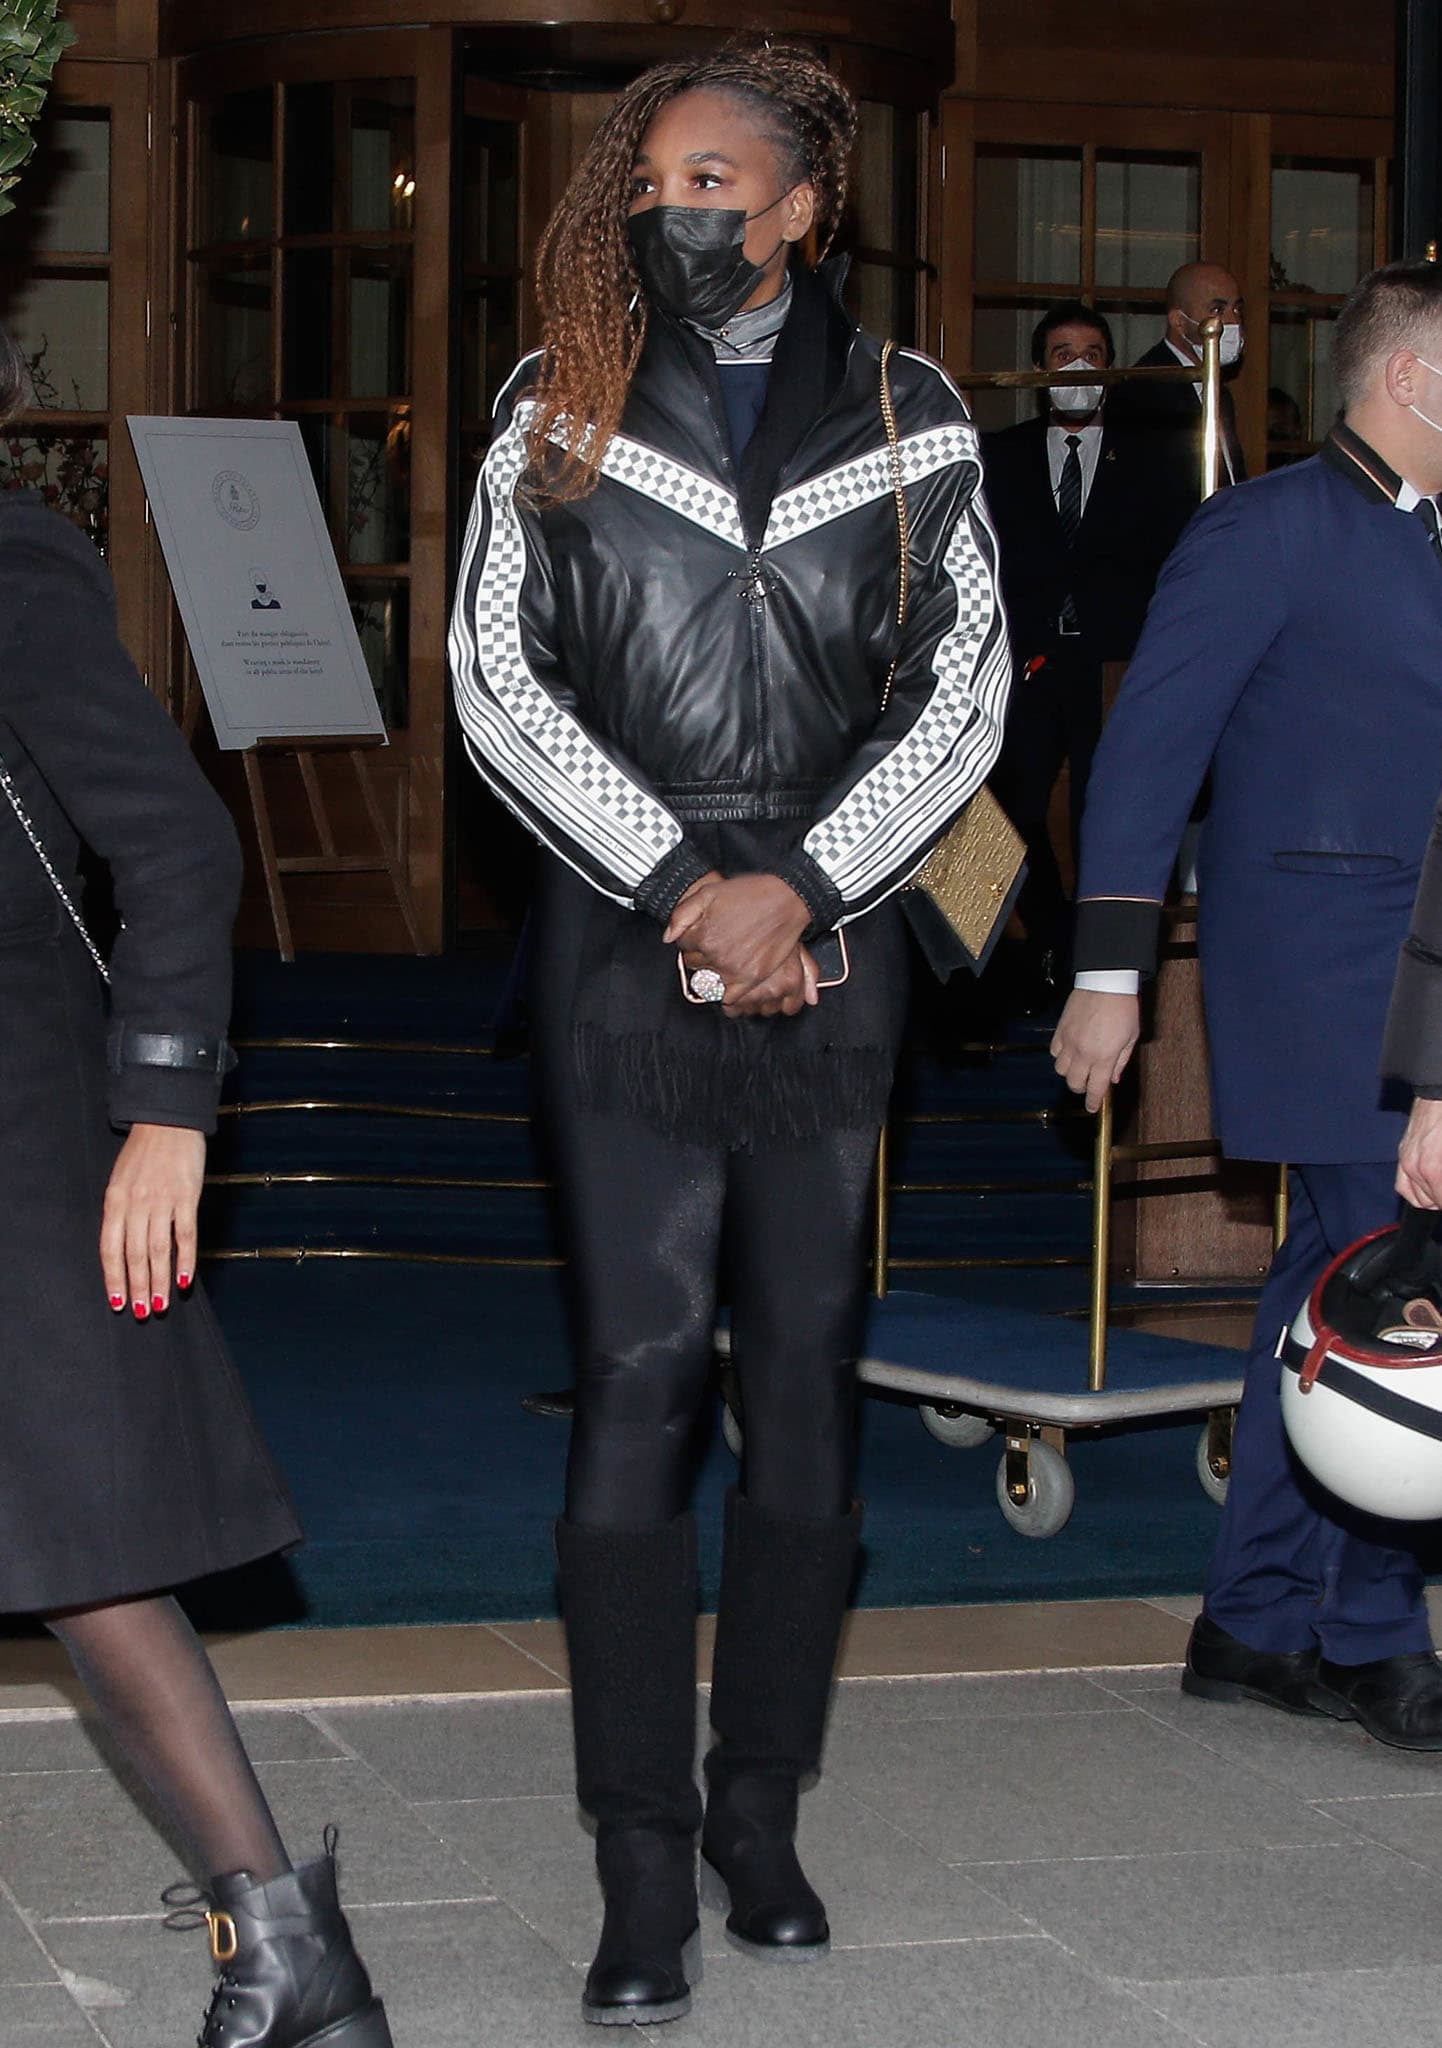 Venus Williams steps out of her Paris hotel in a cozy Louis Vuitton bomber jacket, leggings, and a winter scarf